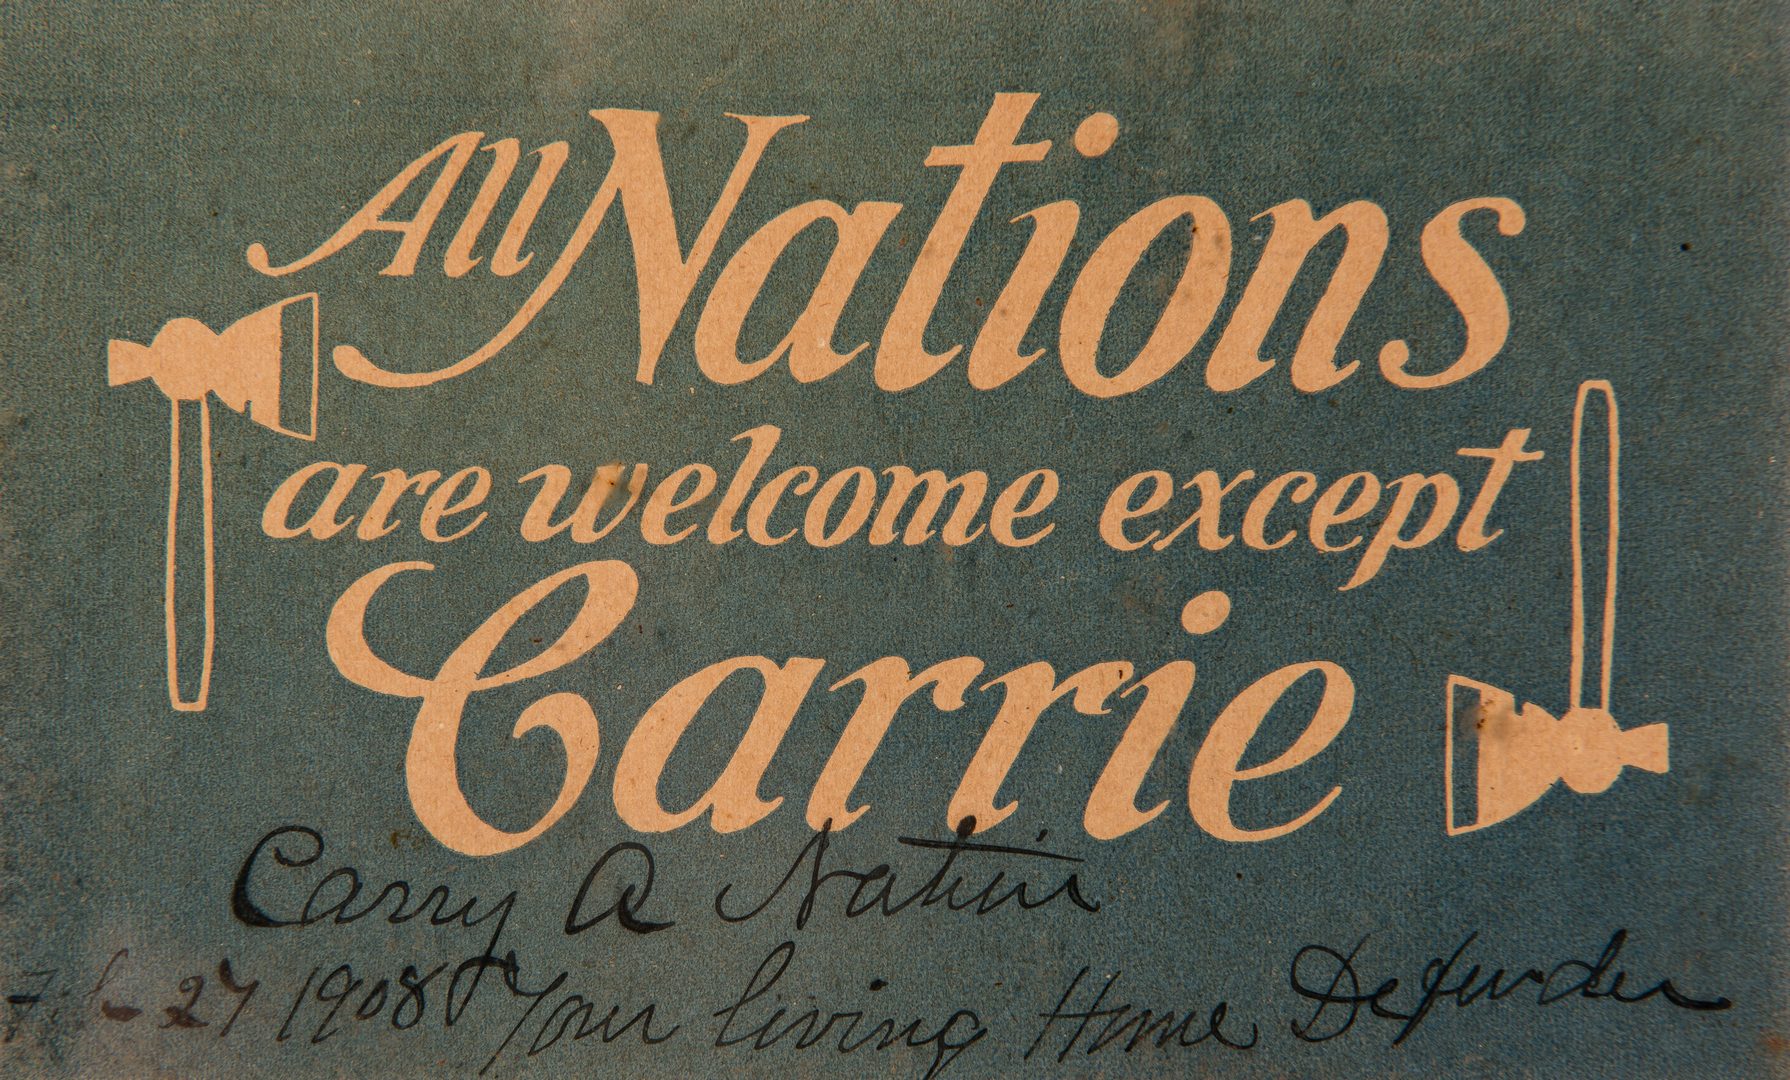 Lot 292: Carry Nations Autograph and Postcards, Framed